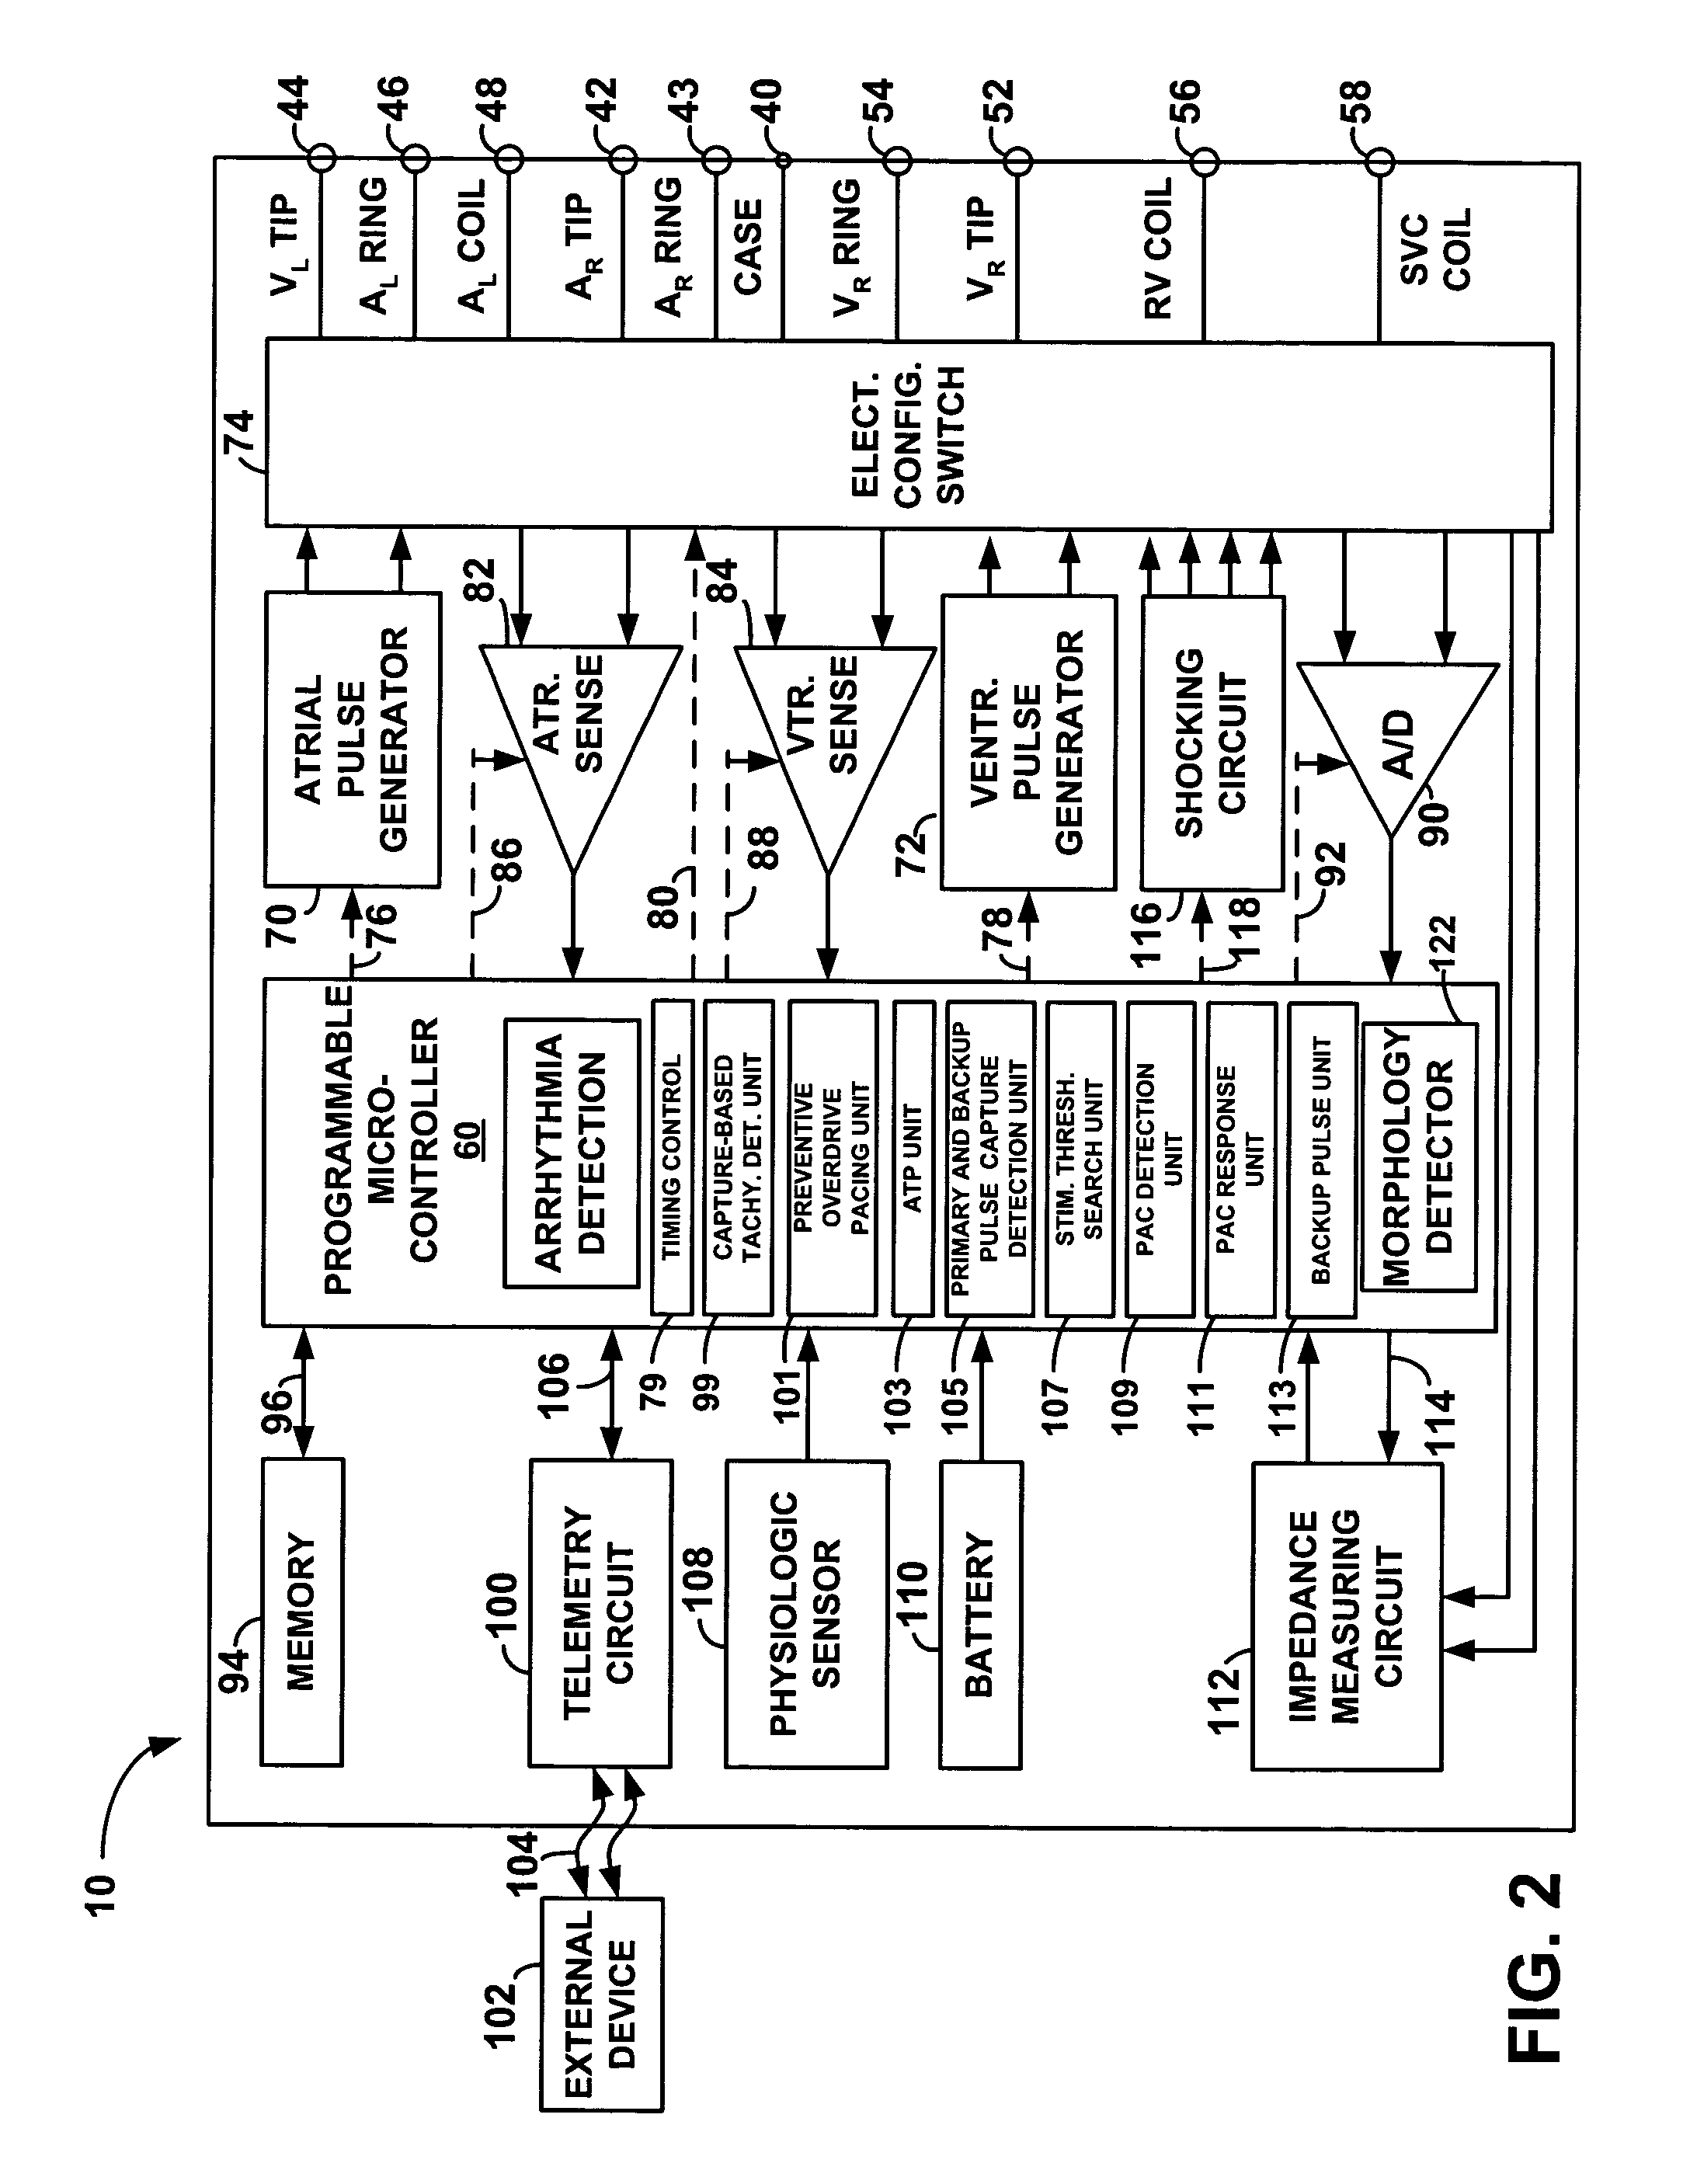 System and method for providing preventive overdrive pacing and antitachycardia pacing using an implantable cardiac stimulation device